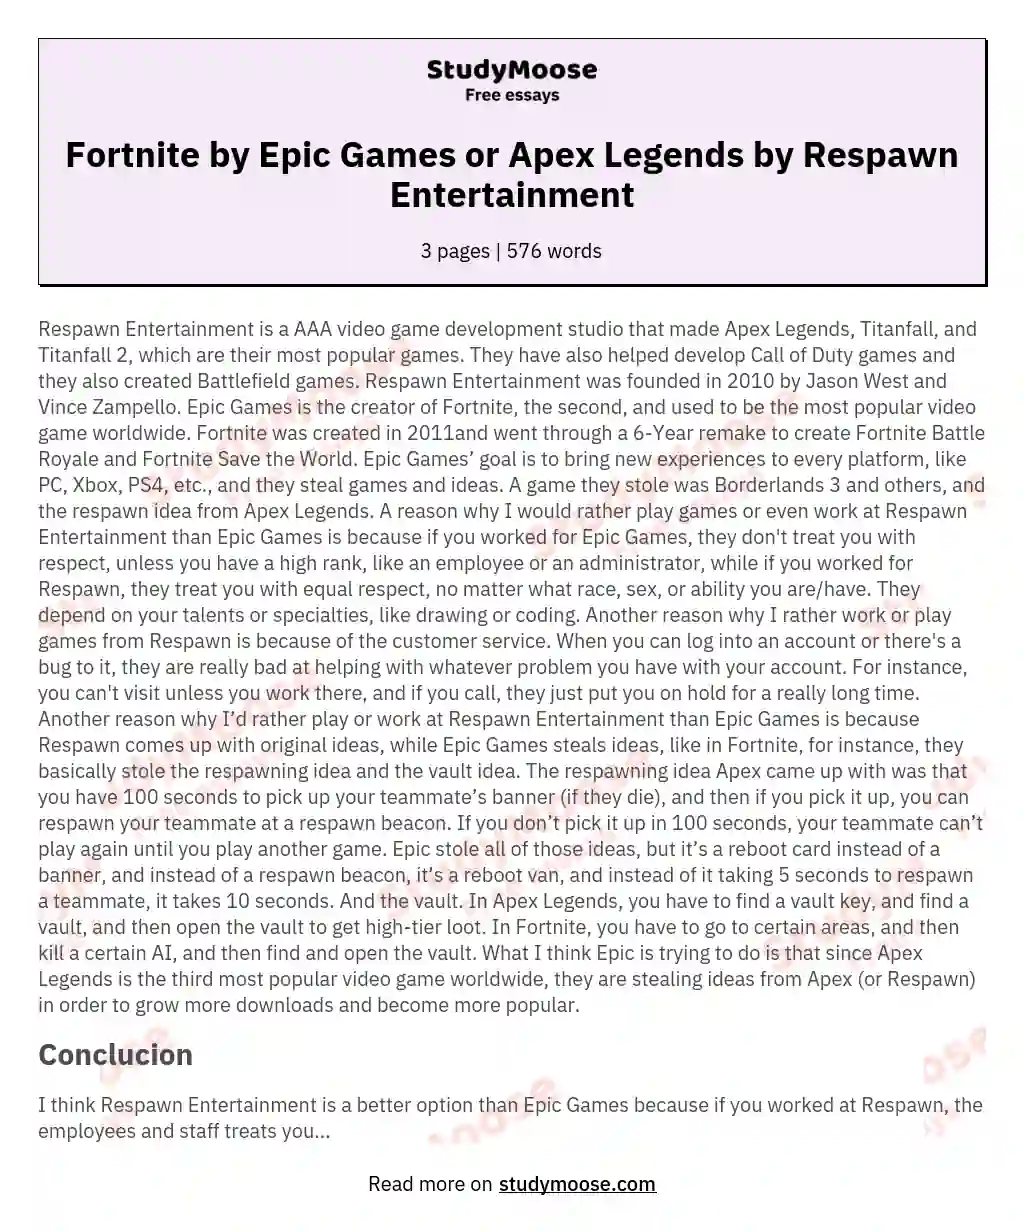 Fortnite by Epic Games or Apex Legends by Respawn Entertainment